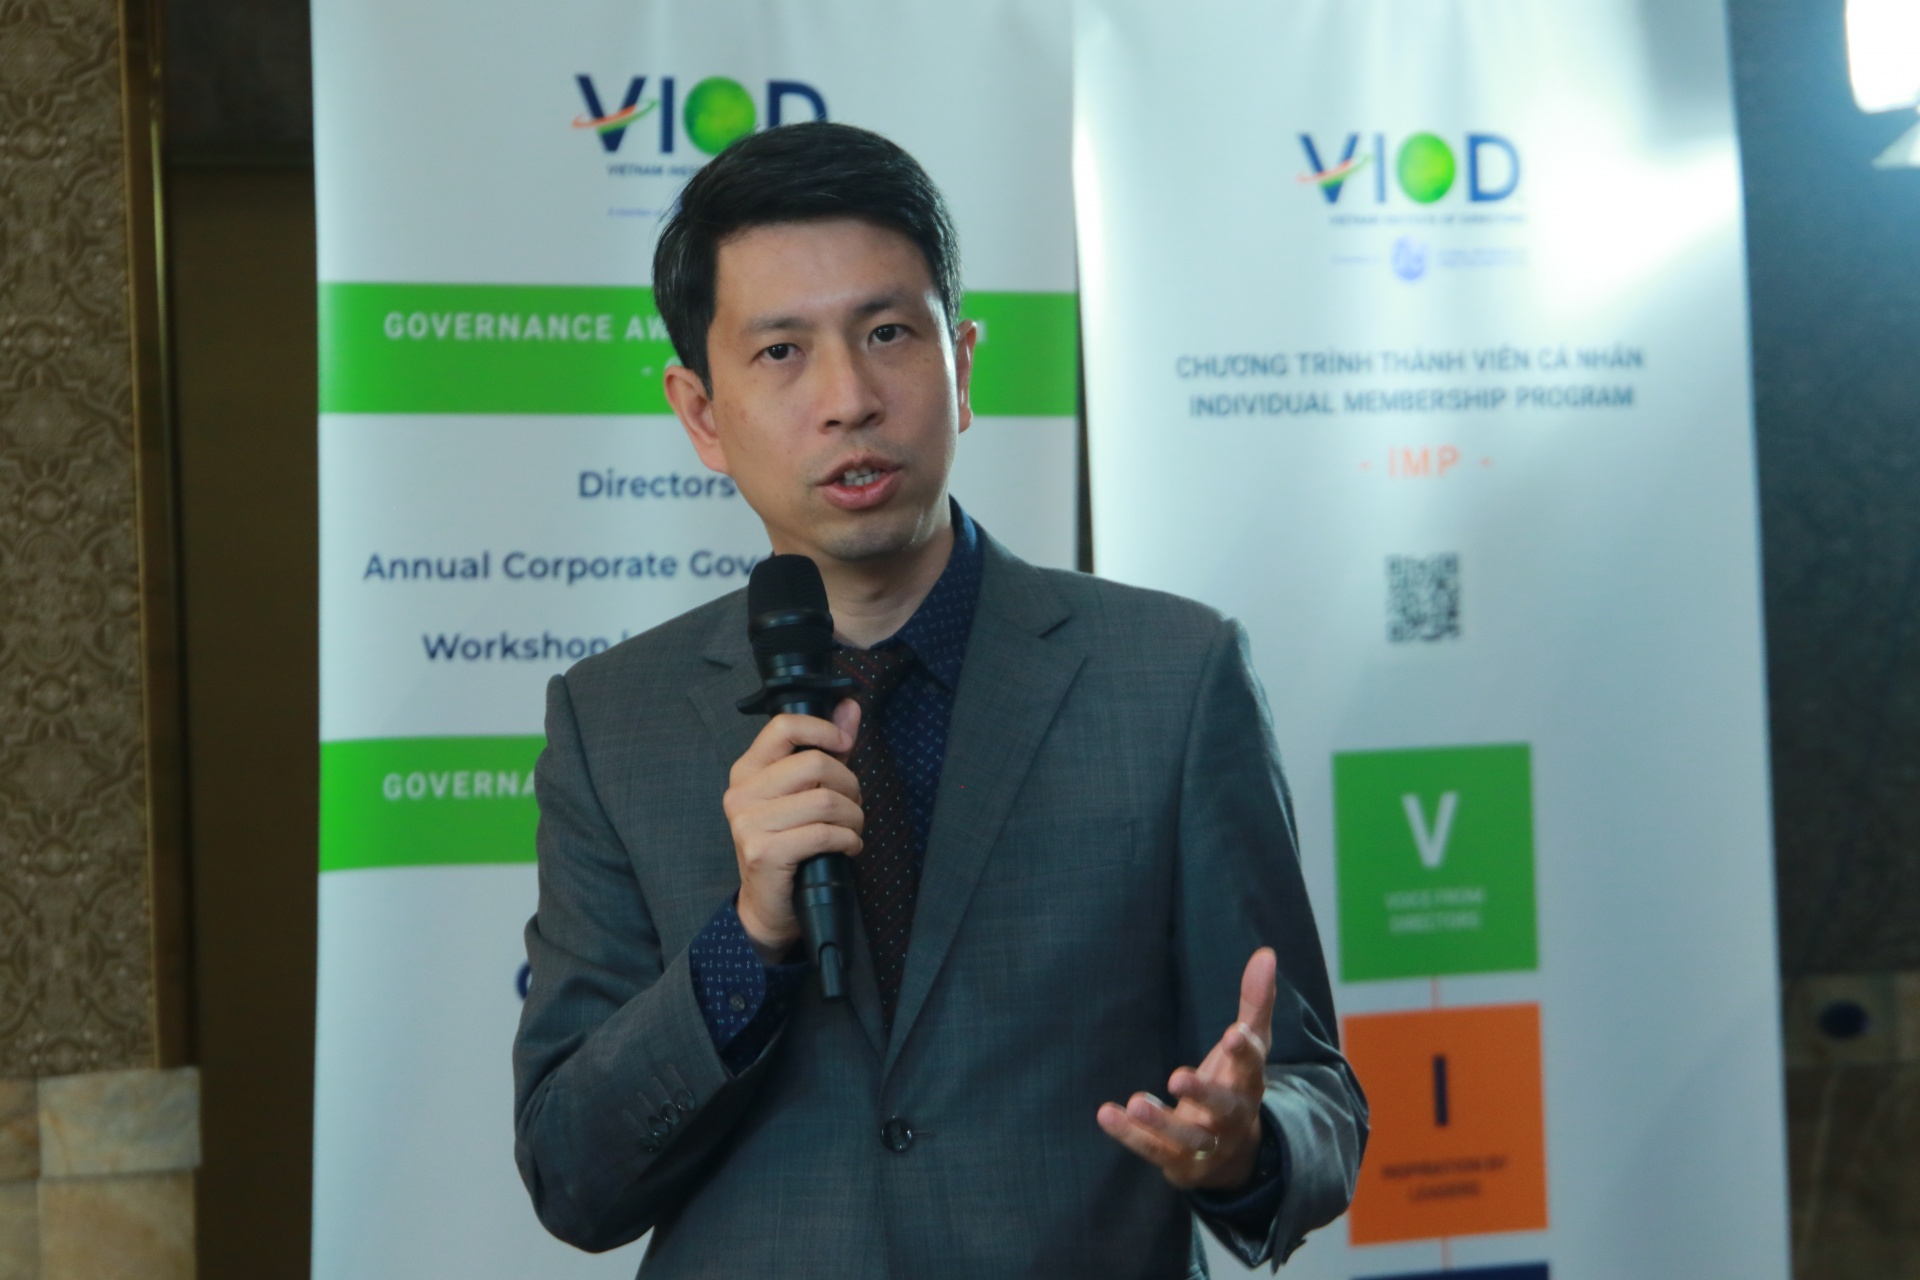 5th Annual Corporate Governance Forum held by VIOD and VIR